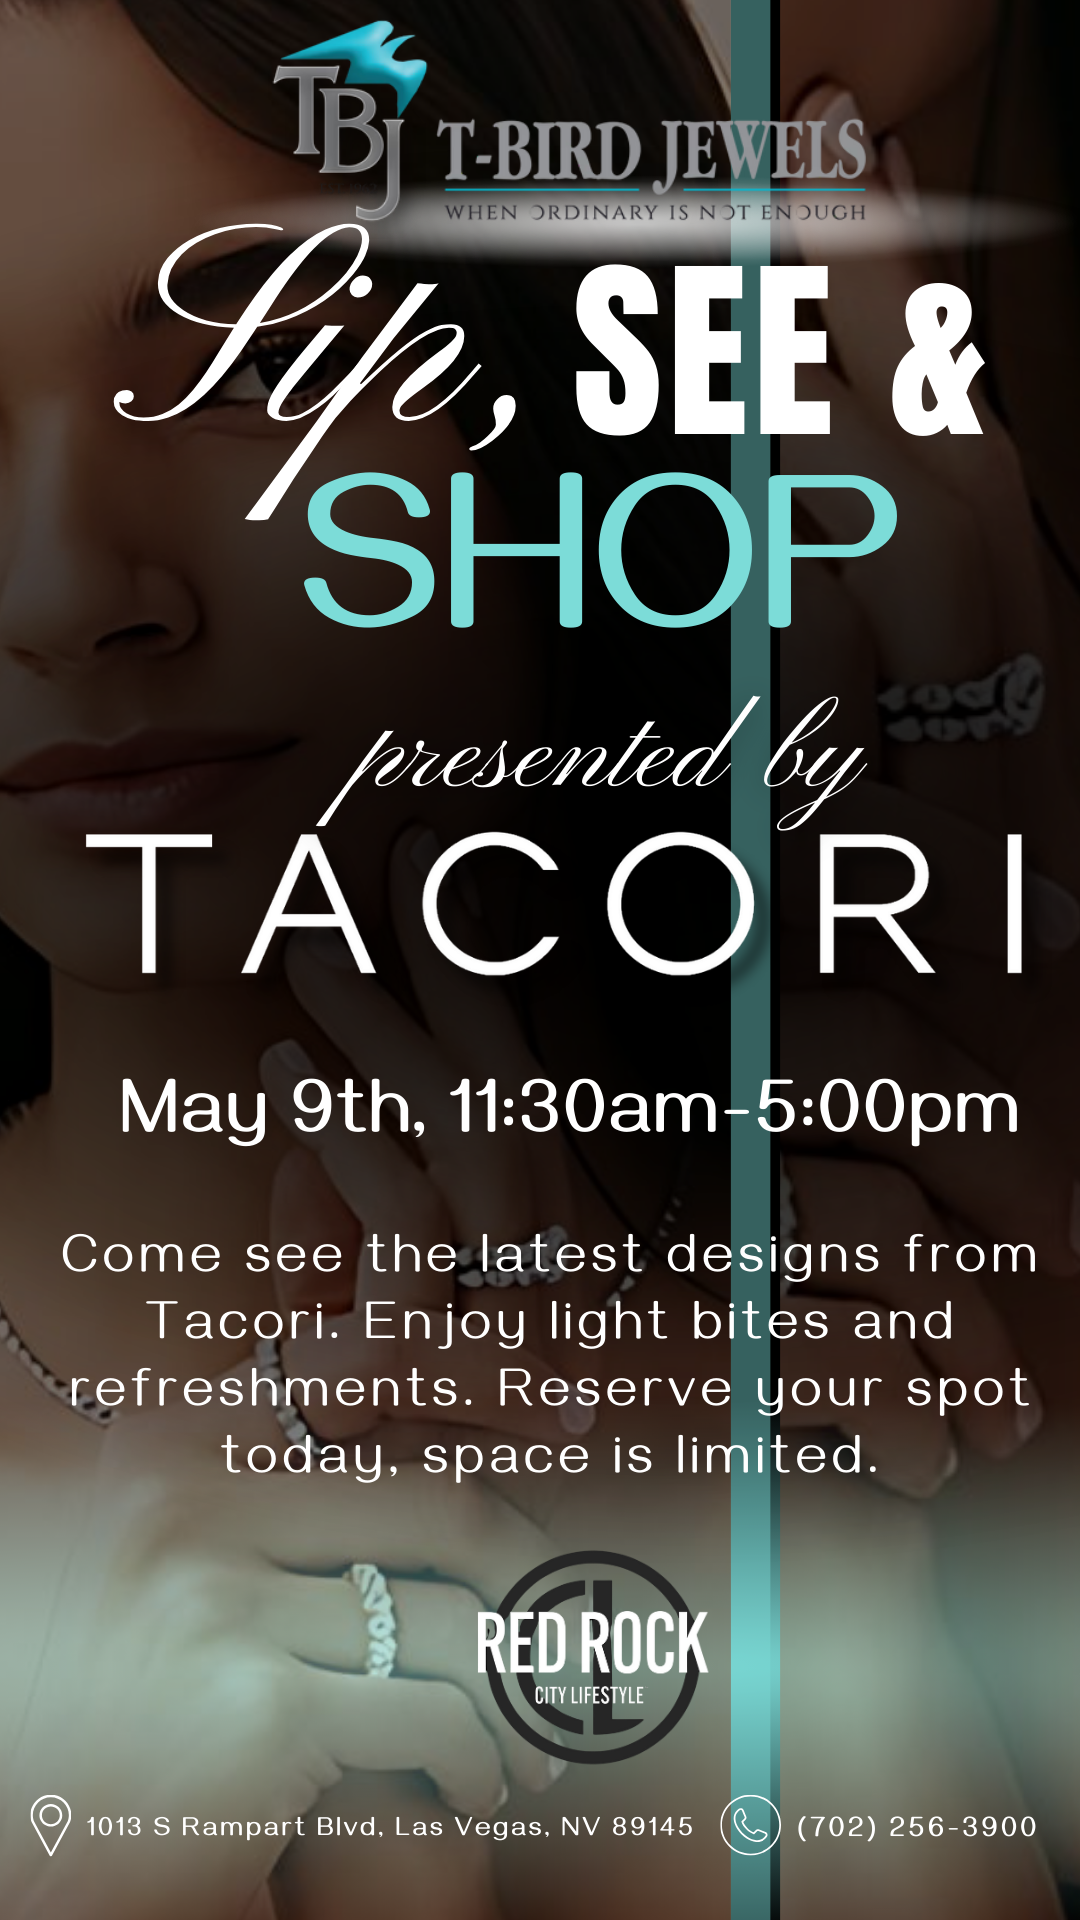 SIP, SEE & SHOP PRESENTING BY TACORI